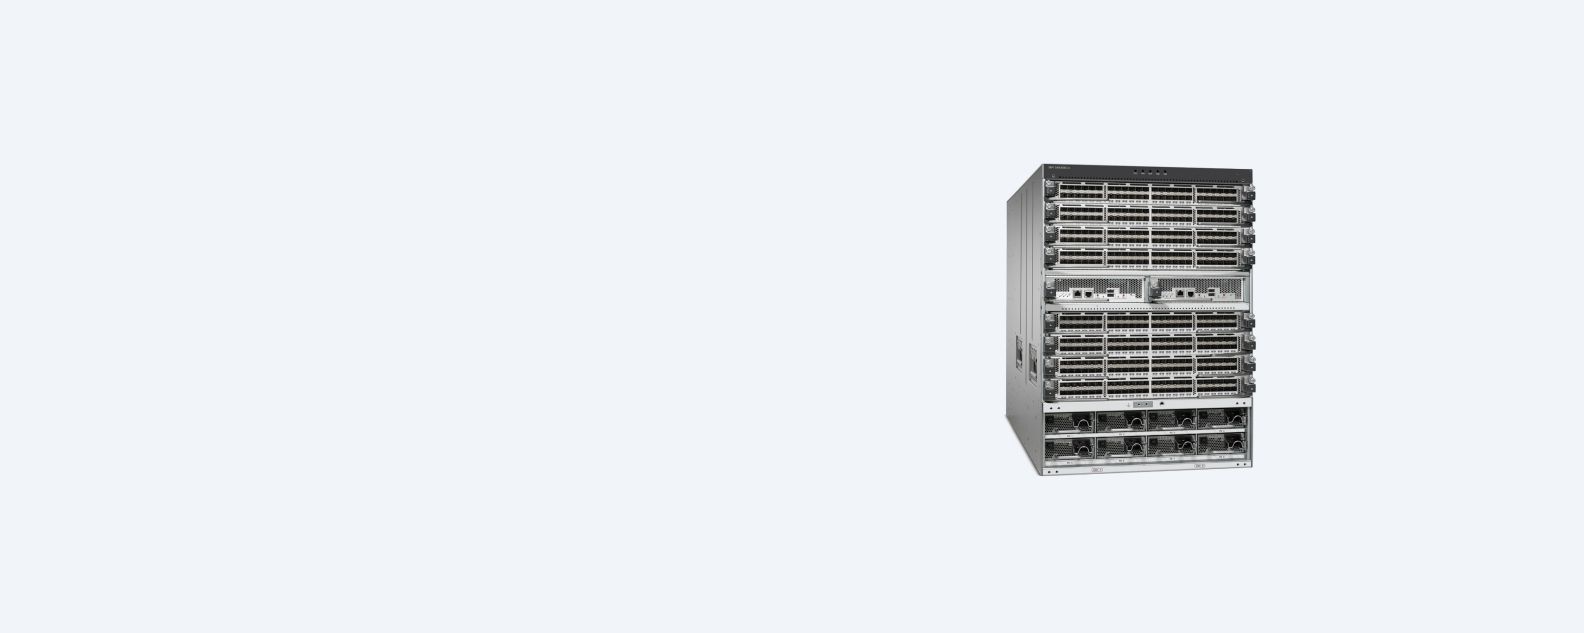 product screenshot of IBM Storage Networking SAN384C-6 Multilayer Director switch